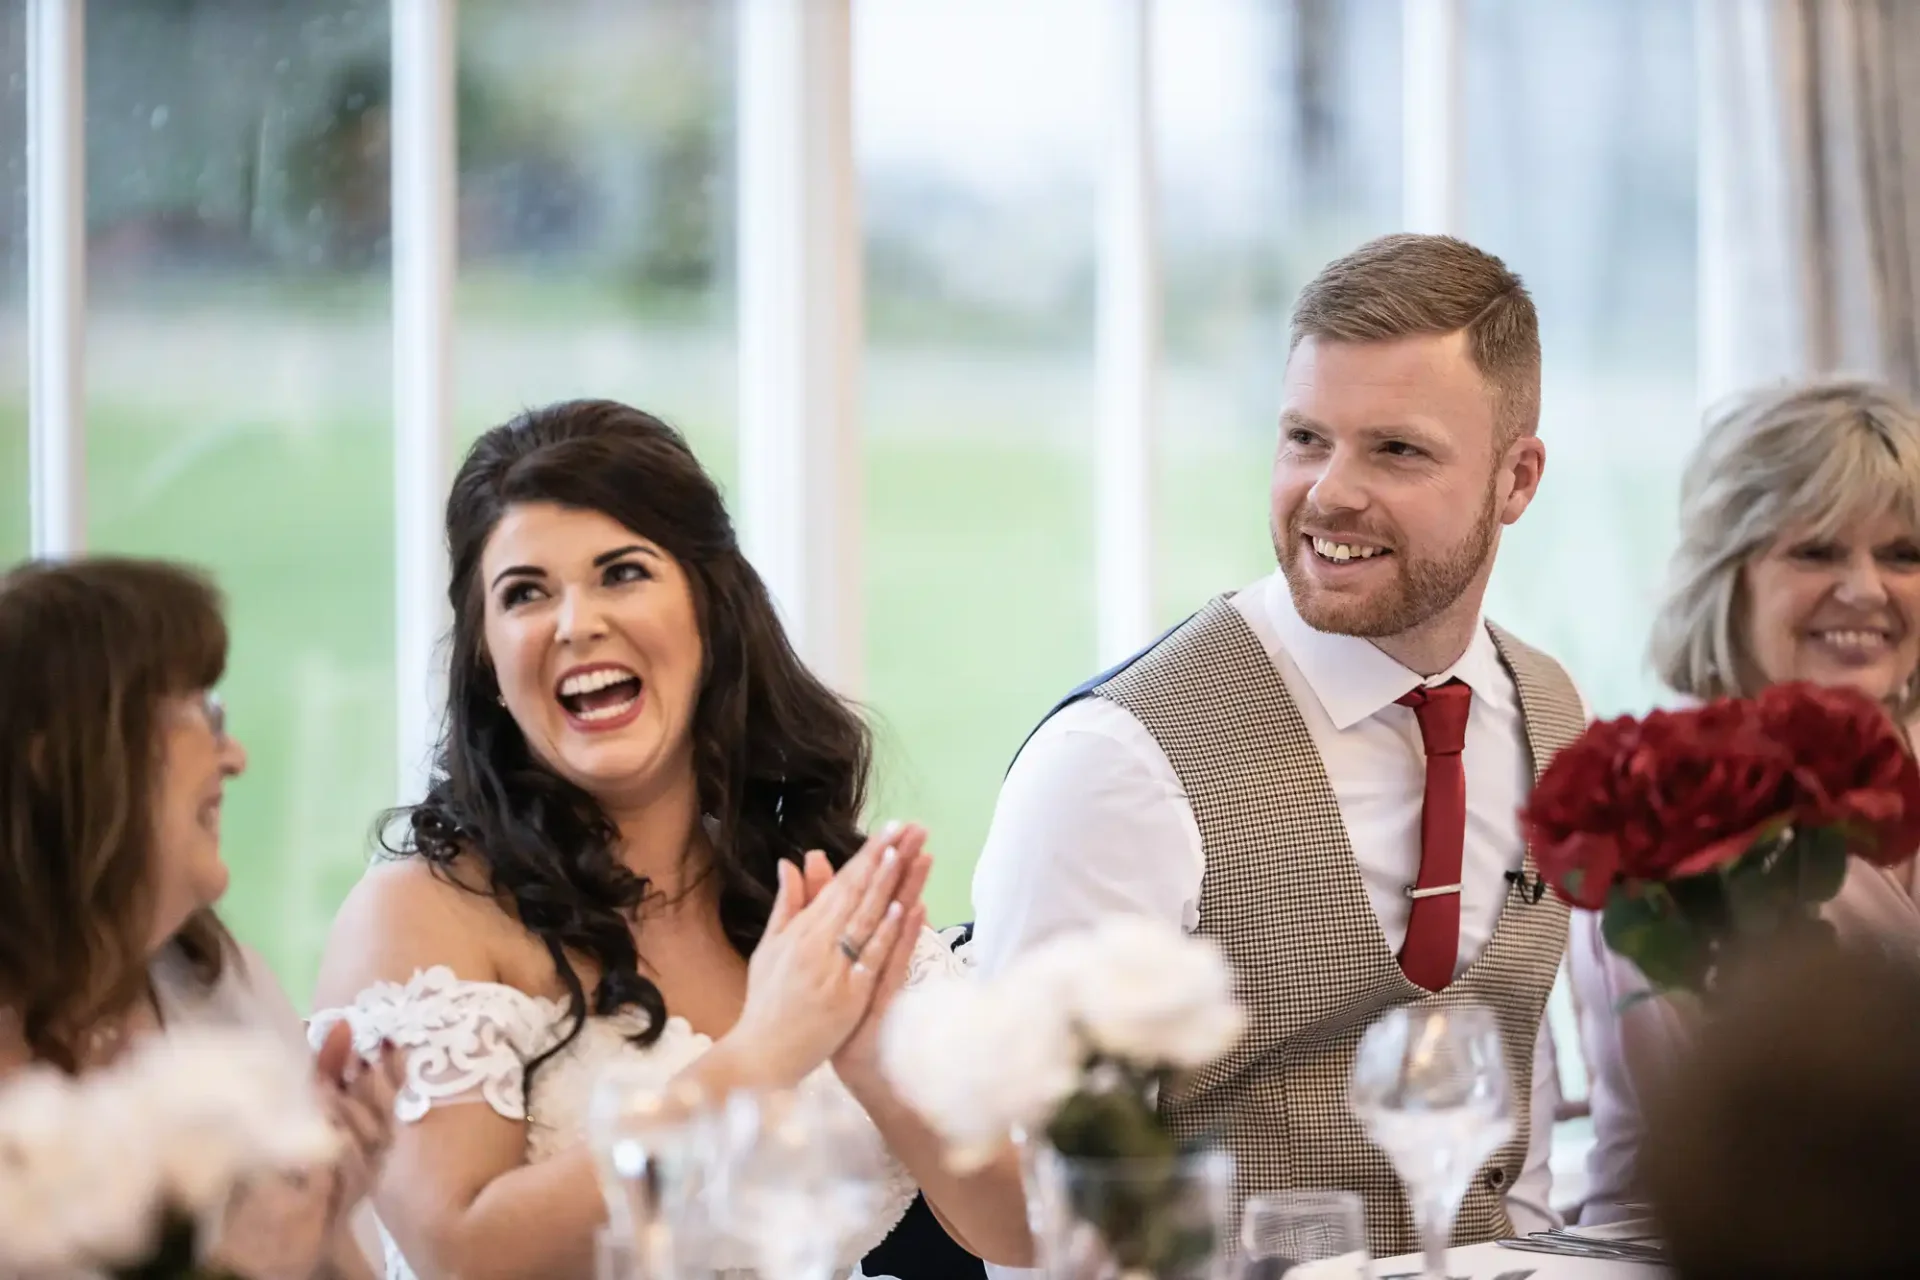 A joyful bride and groom sit at a wedding reception, laughing together in a brightly lit room with large windows overlooking a green landscape.